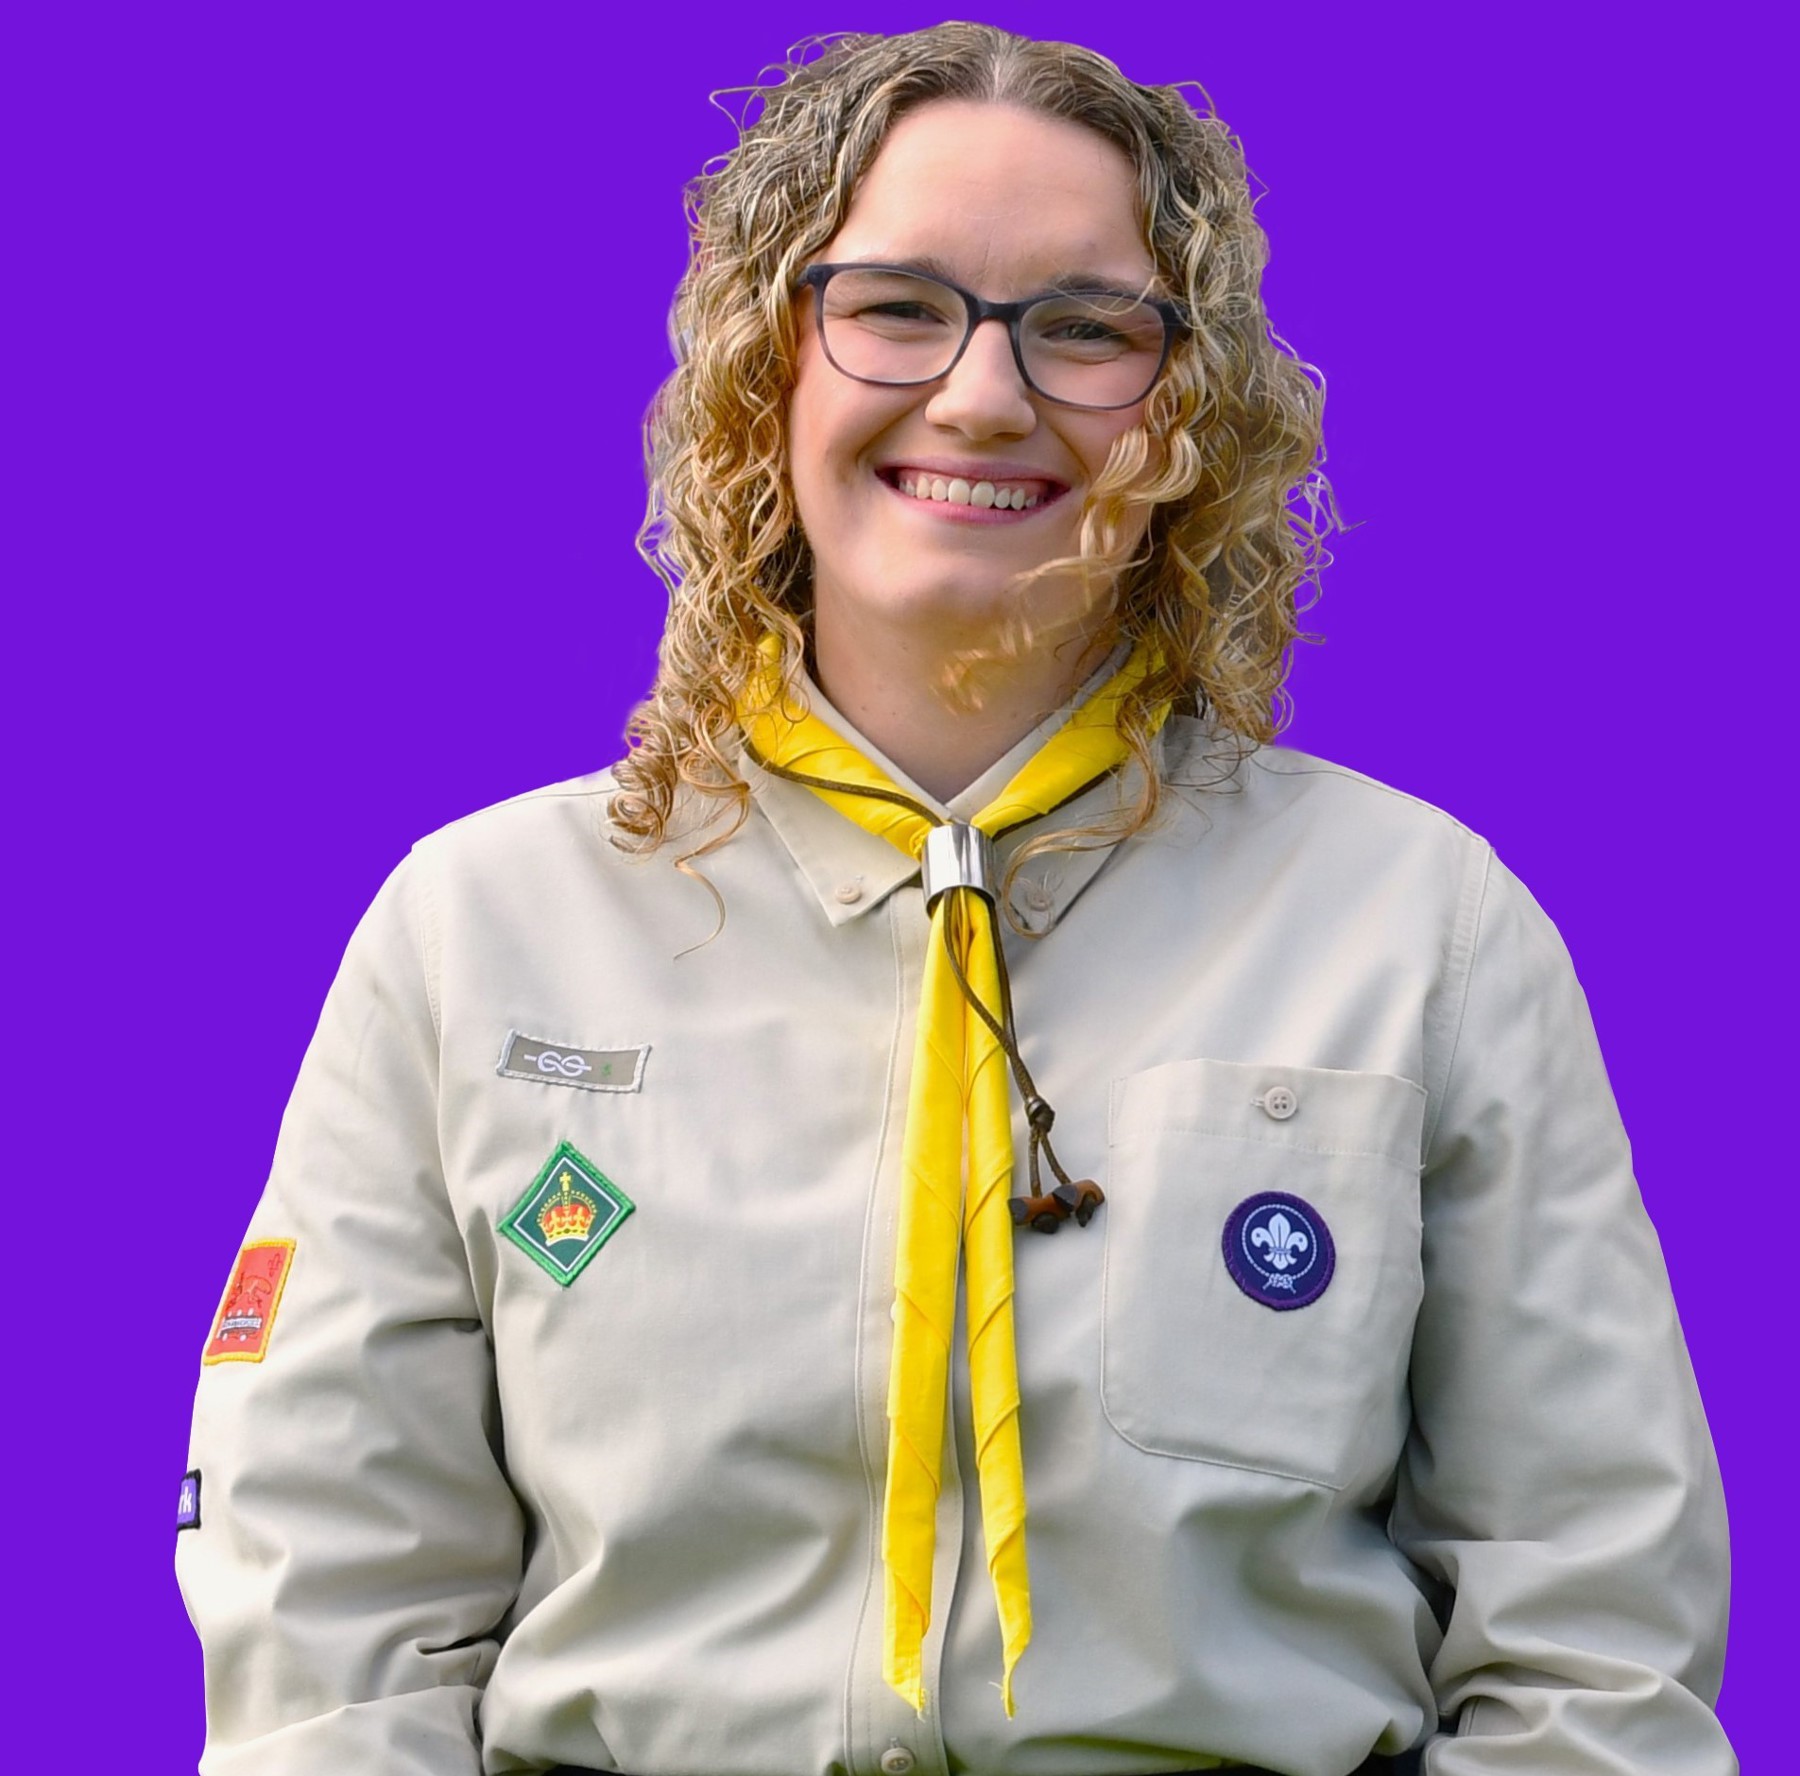 This image shows a woman with curly blonde hair wearing glasses and smiling at the camera in front of a plain purple background. She's wearing a Scouts uniform shirt and a yellow necker.